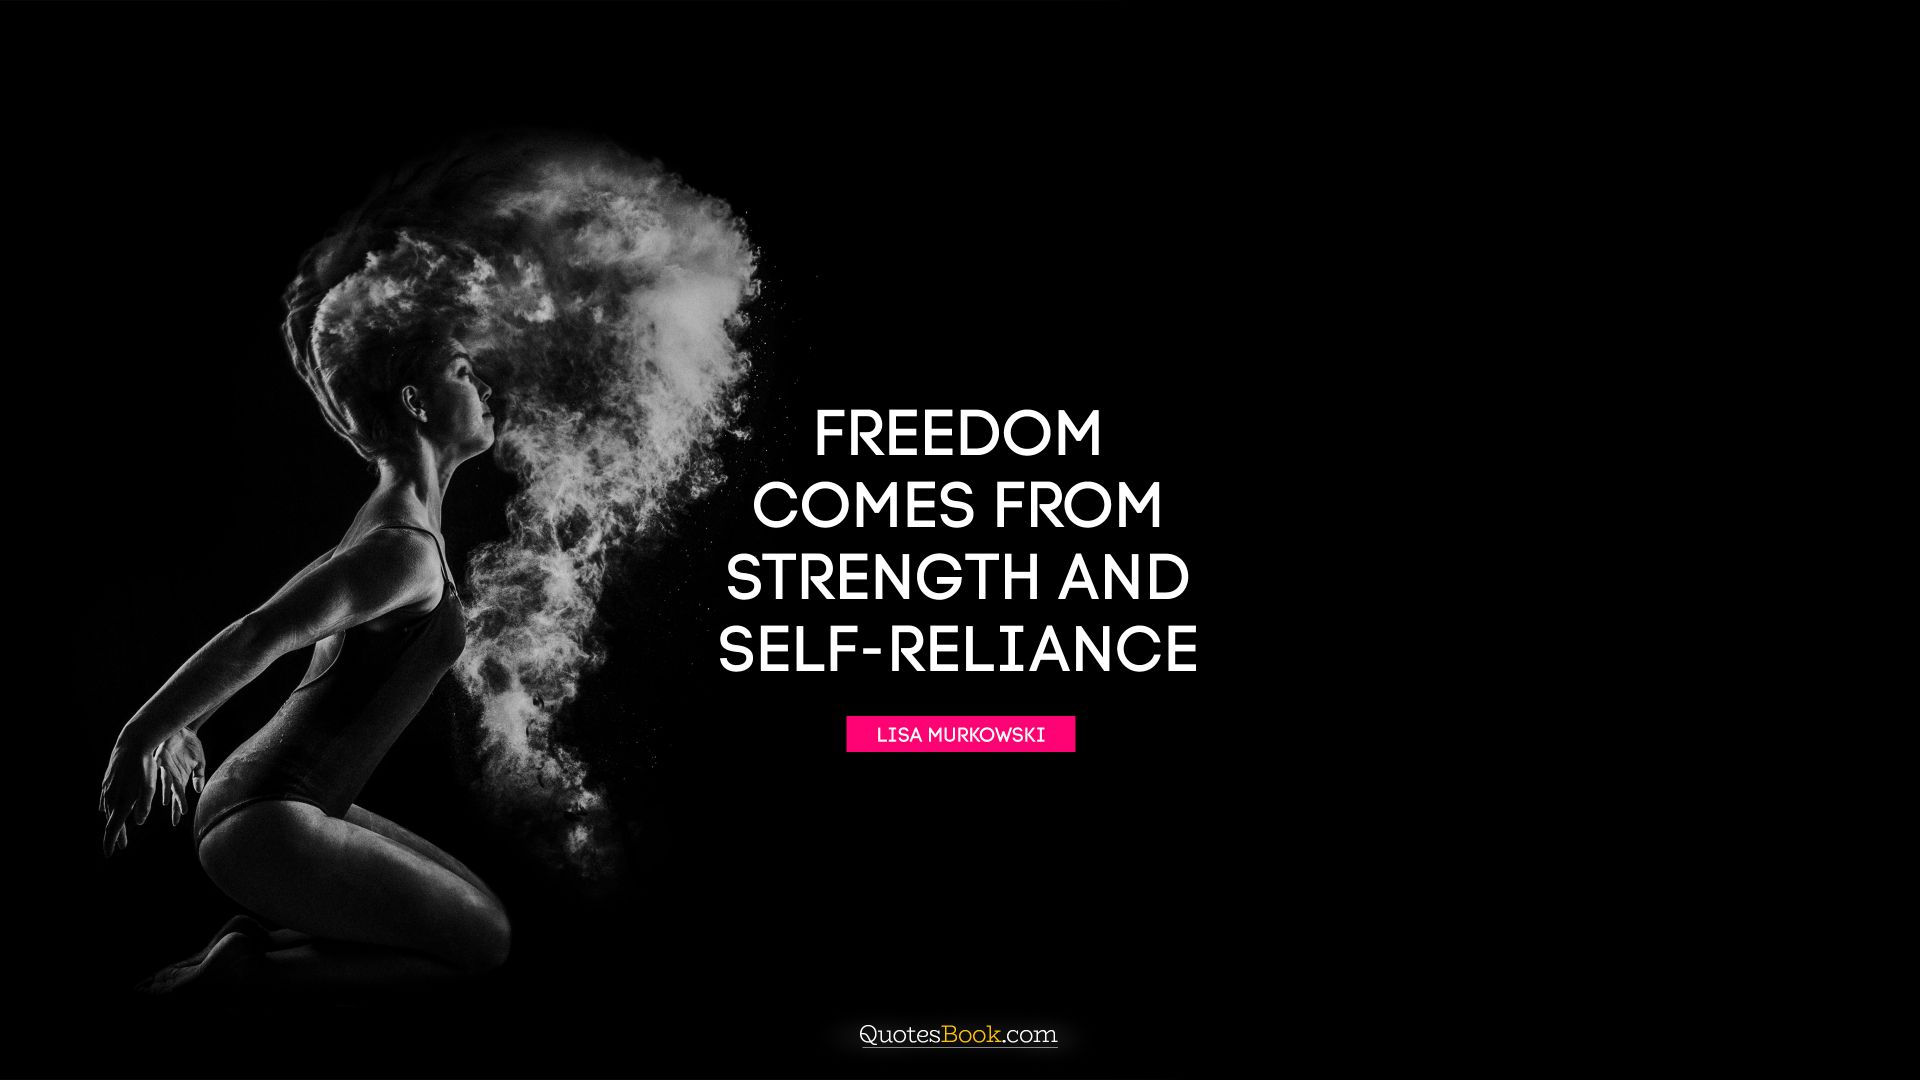 Freedom comes from strength and self-reliance. - Quote by Lisa Murkowski